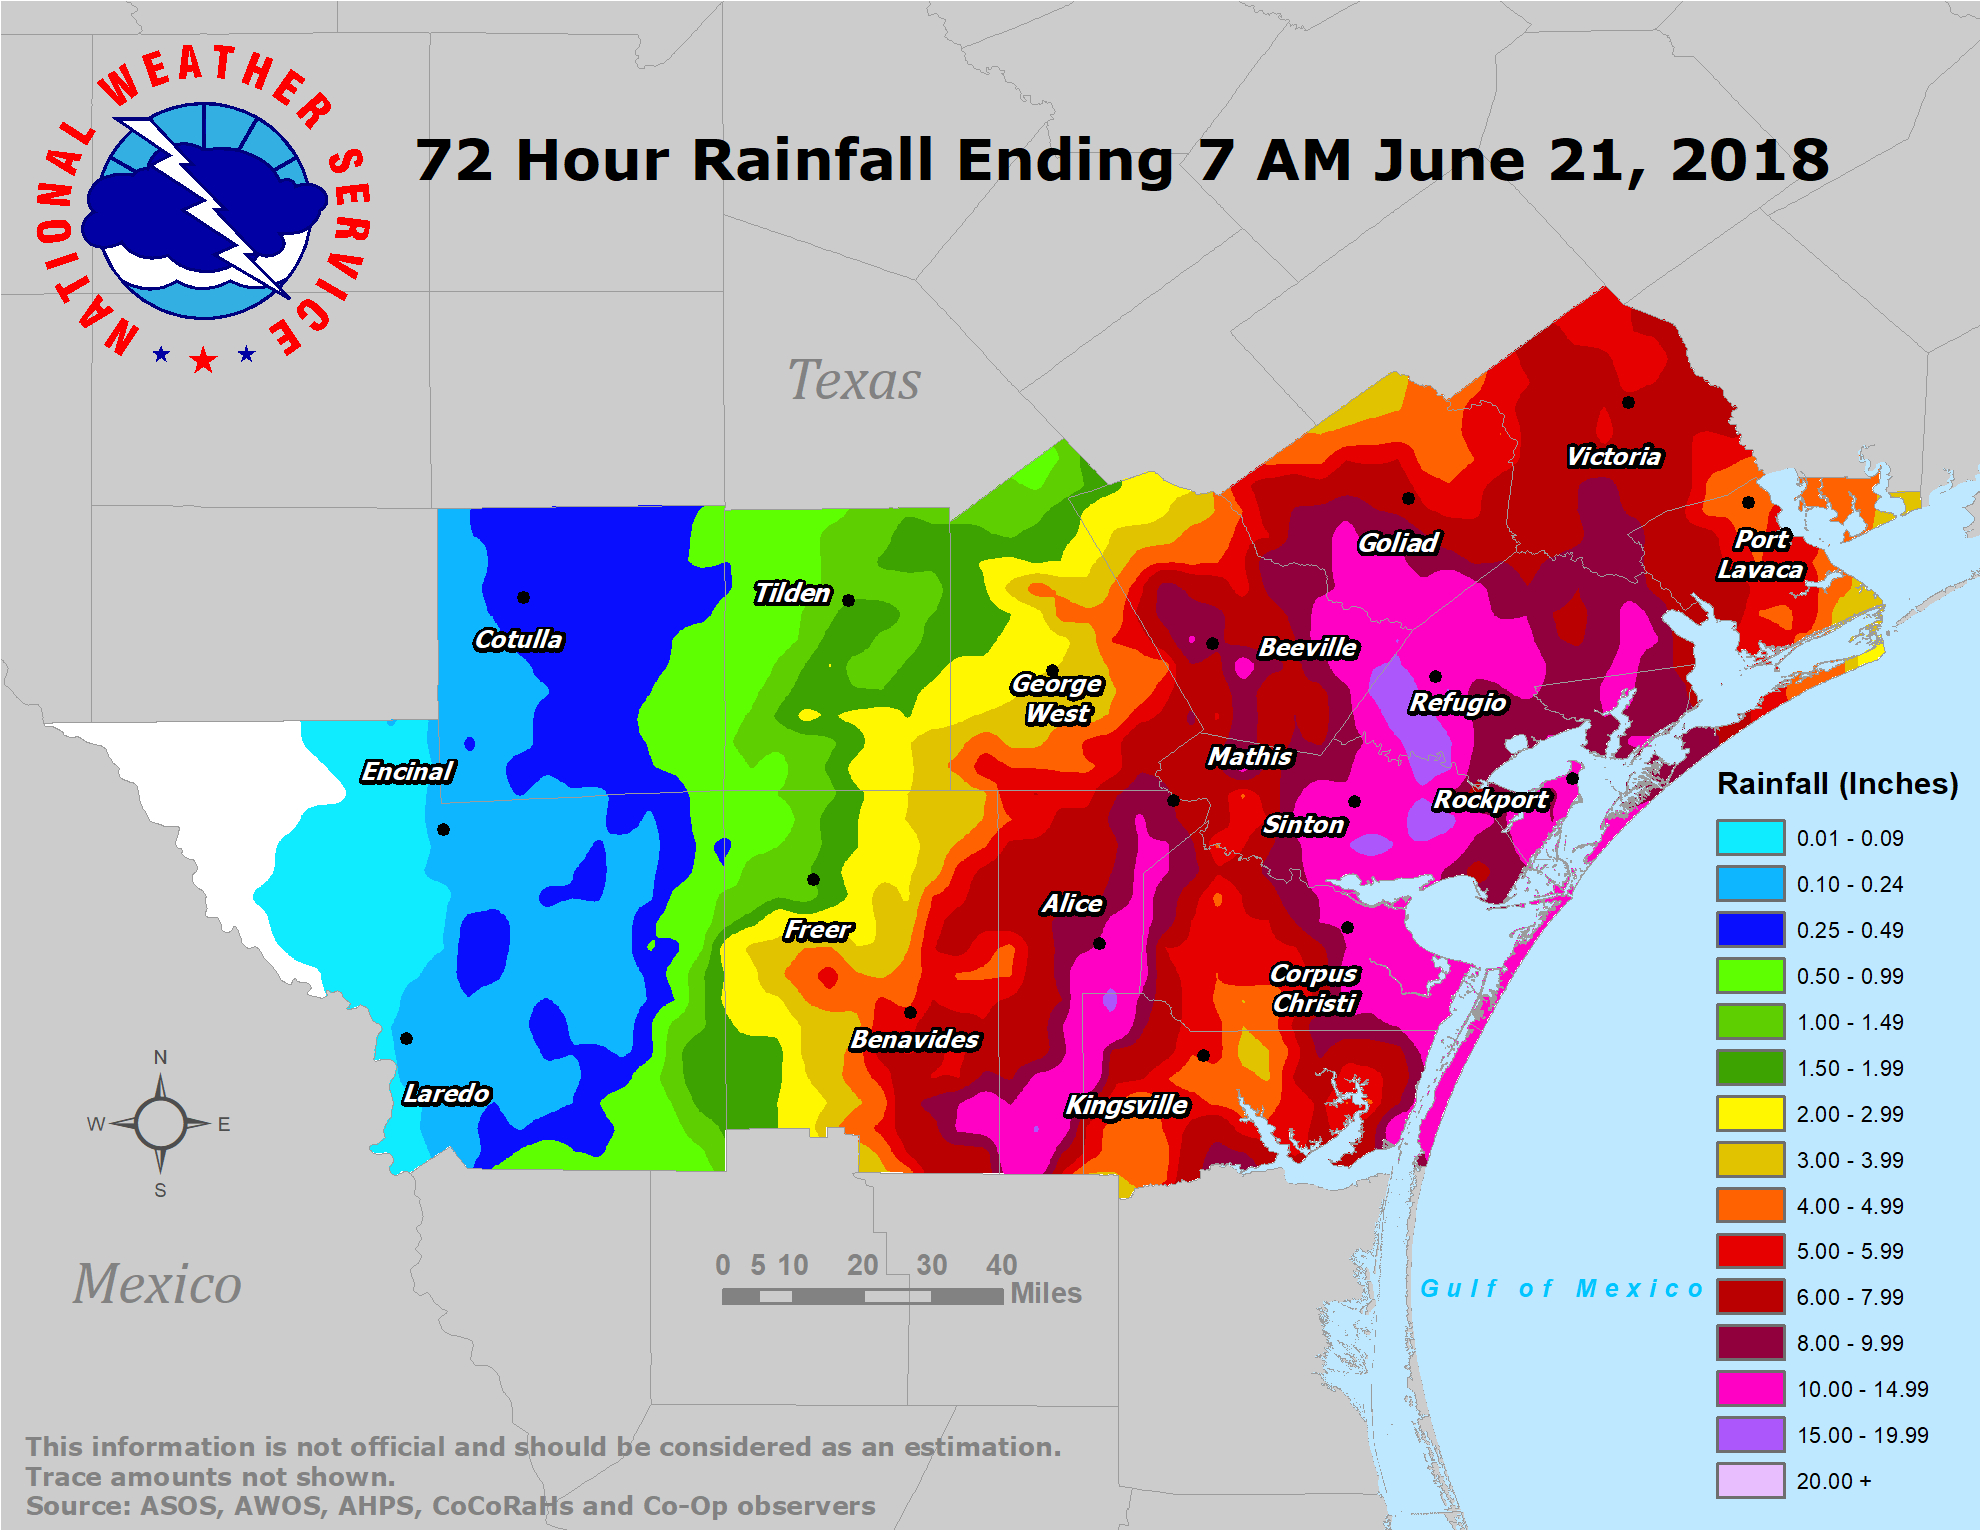 South Texas Heavy Rain And Flooding Event: June 18-21, 2018 - Map Of Flooded Areas In Texas